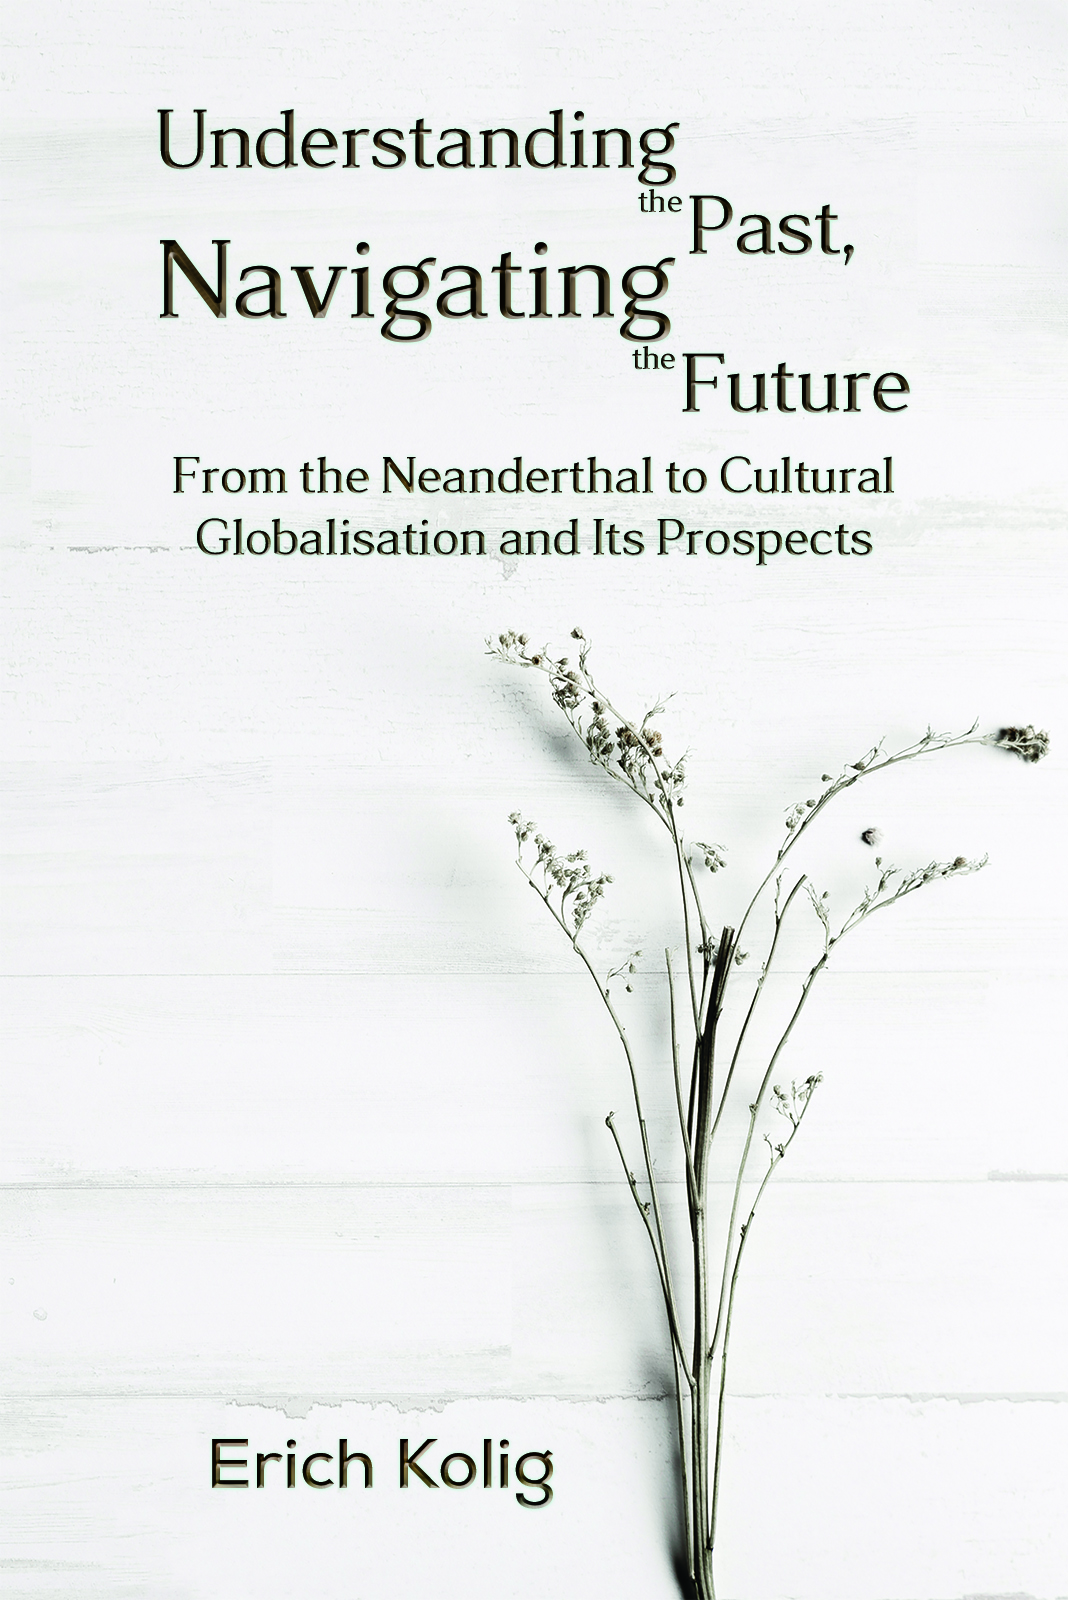 This image is the cover for the book Understanding the Past, Navigating the Future